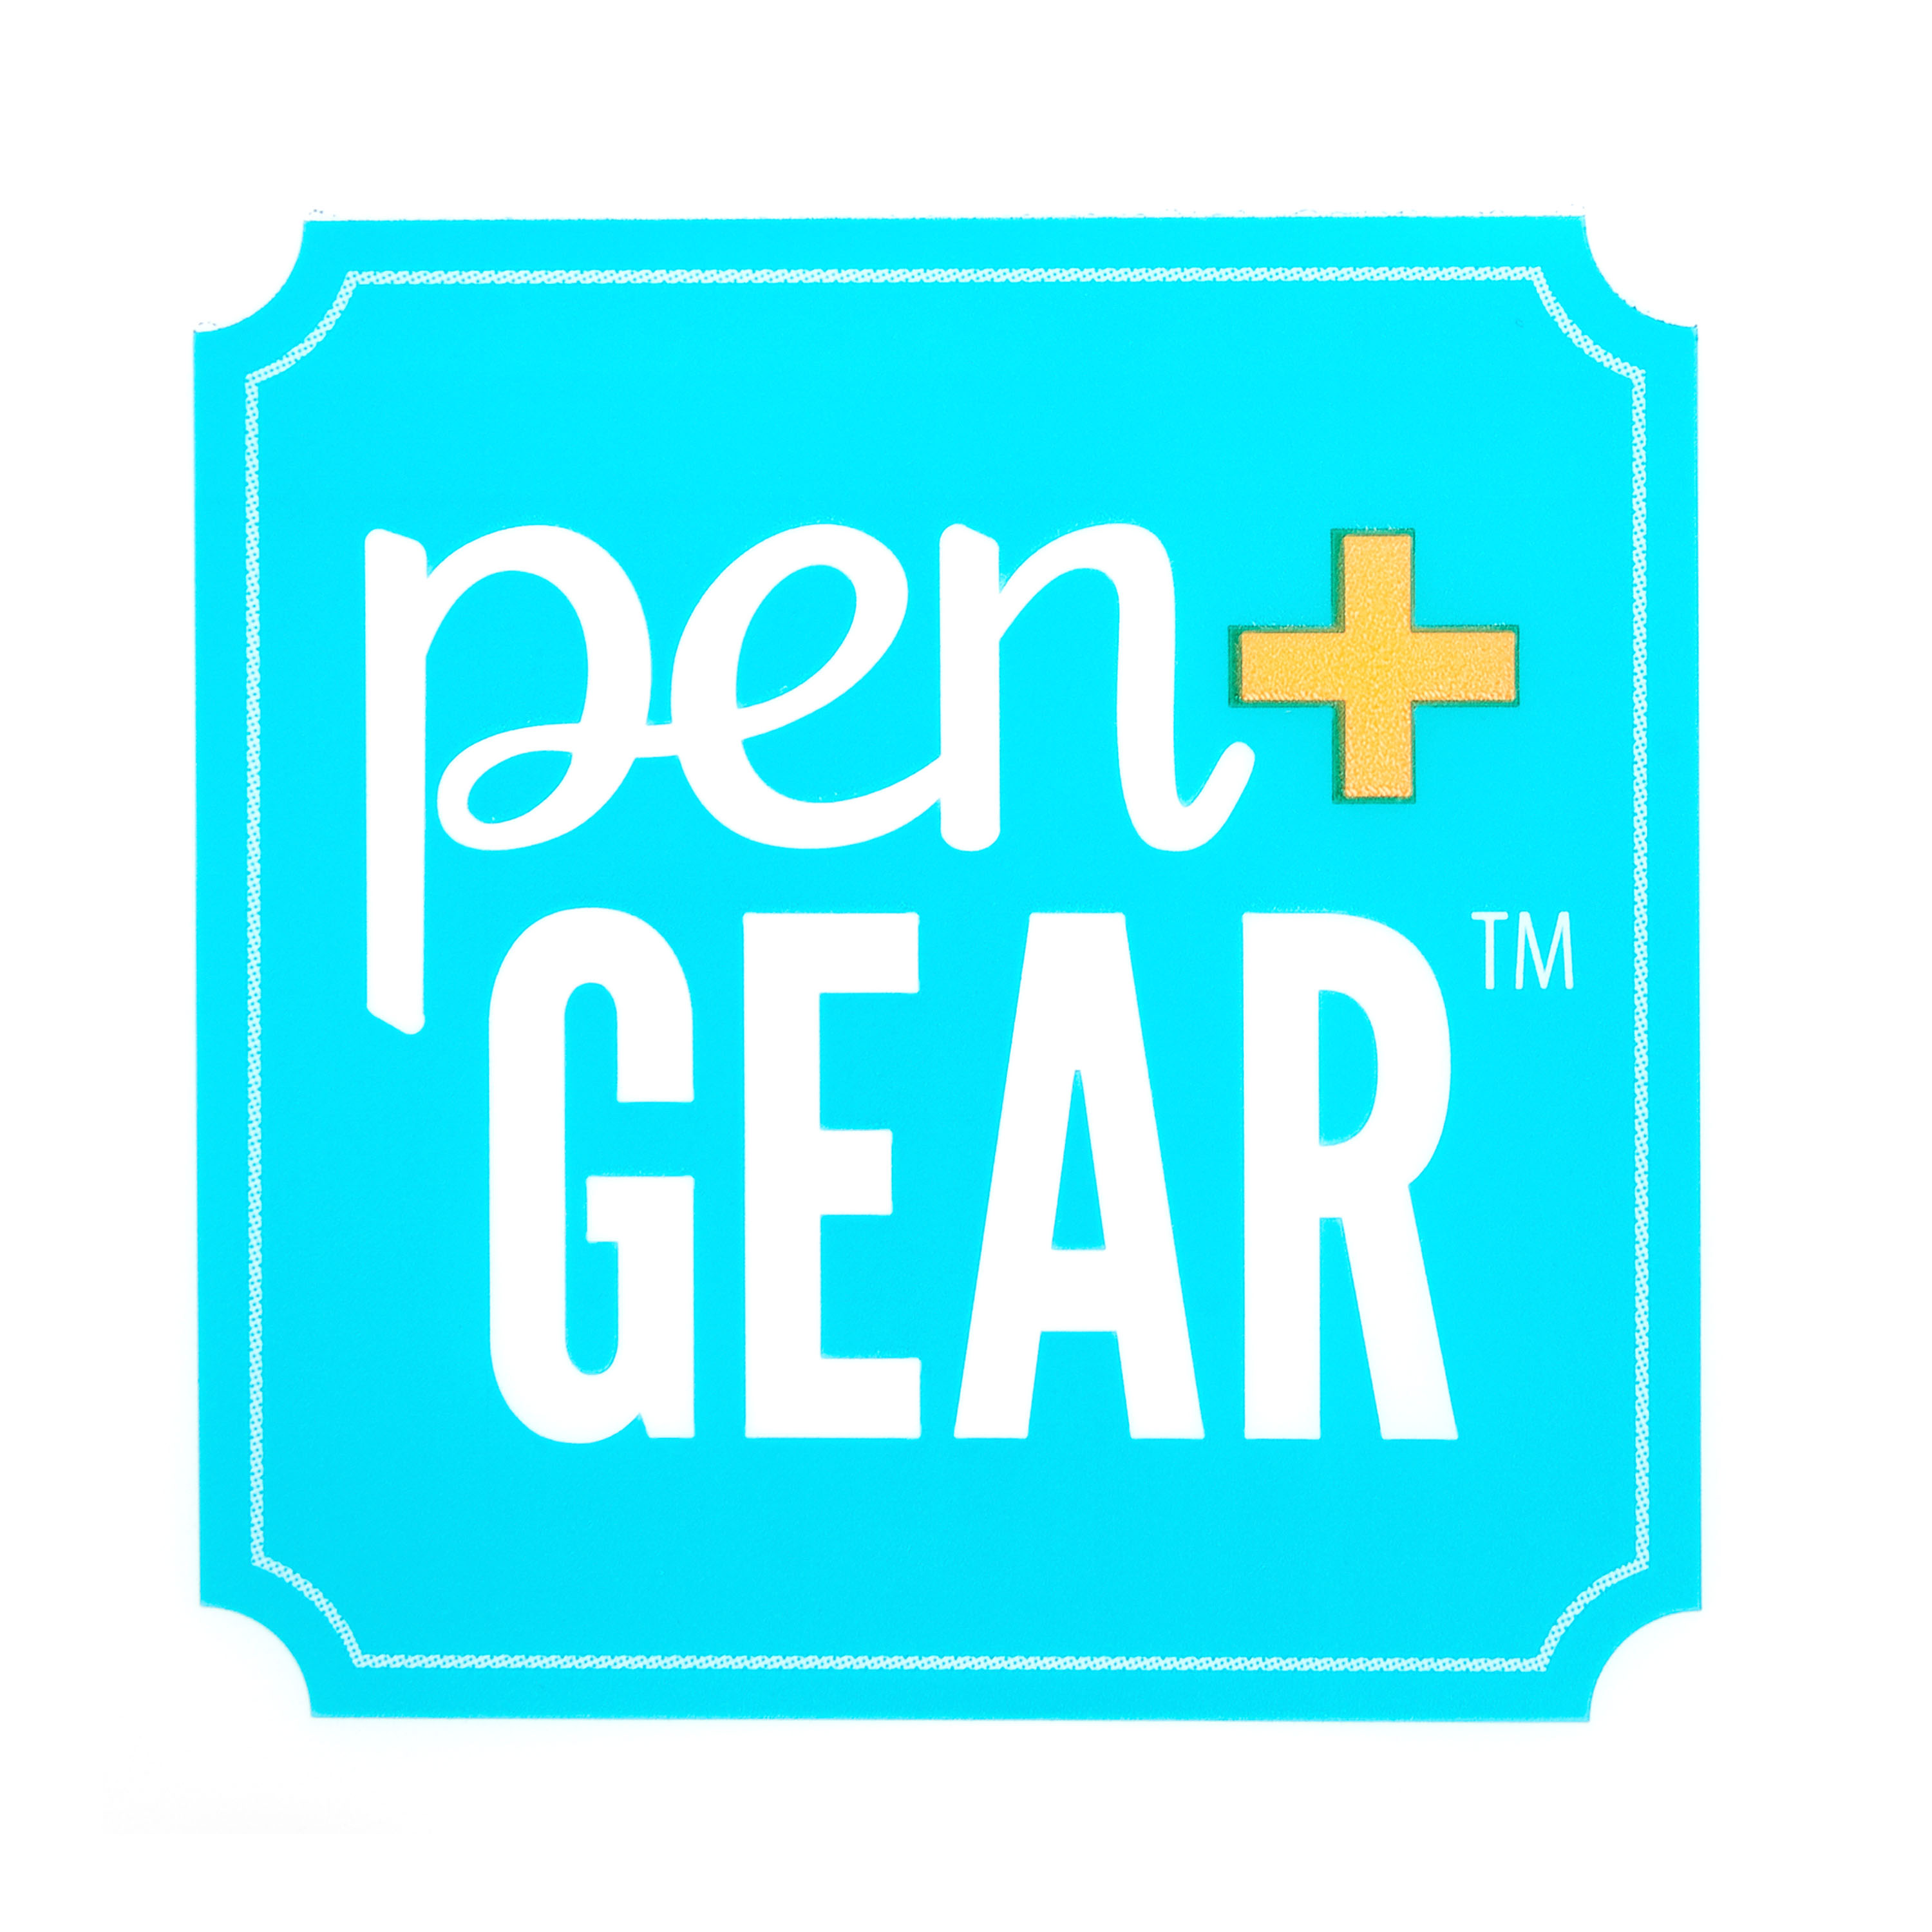 Pen + Gear No. 2 Wood Pencils, Holographic, Sharpened, 12 Count - image 5 of 5